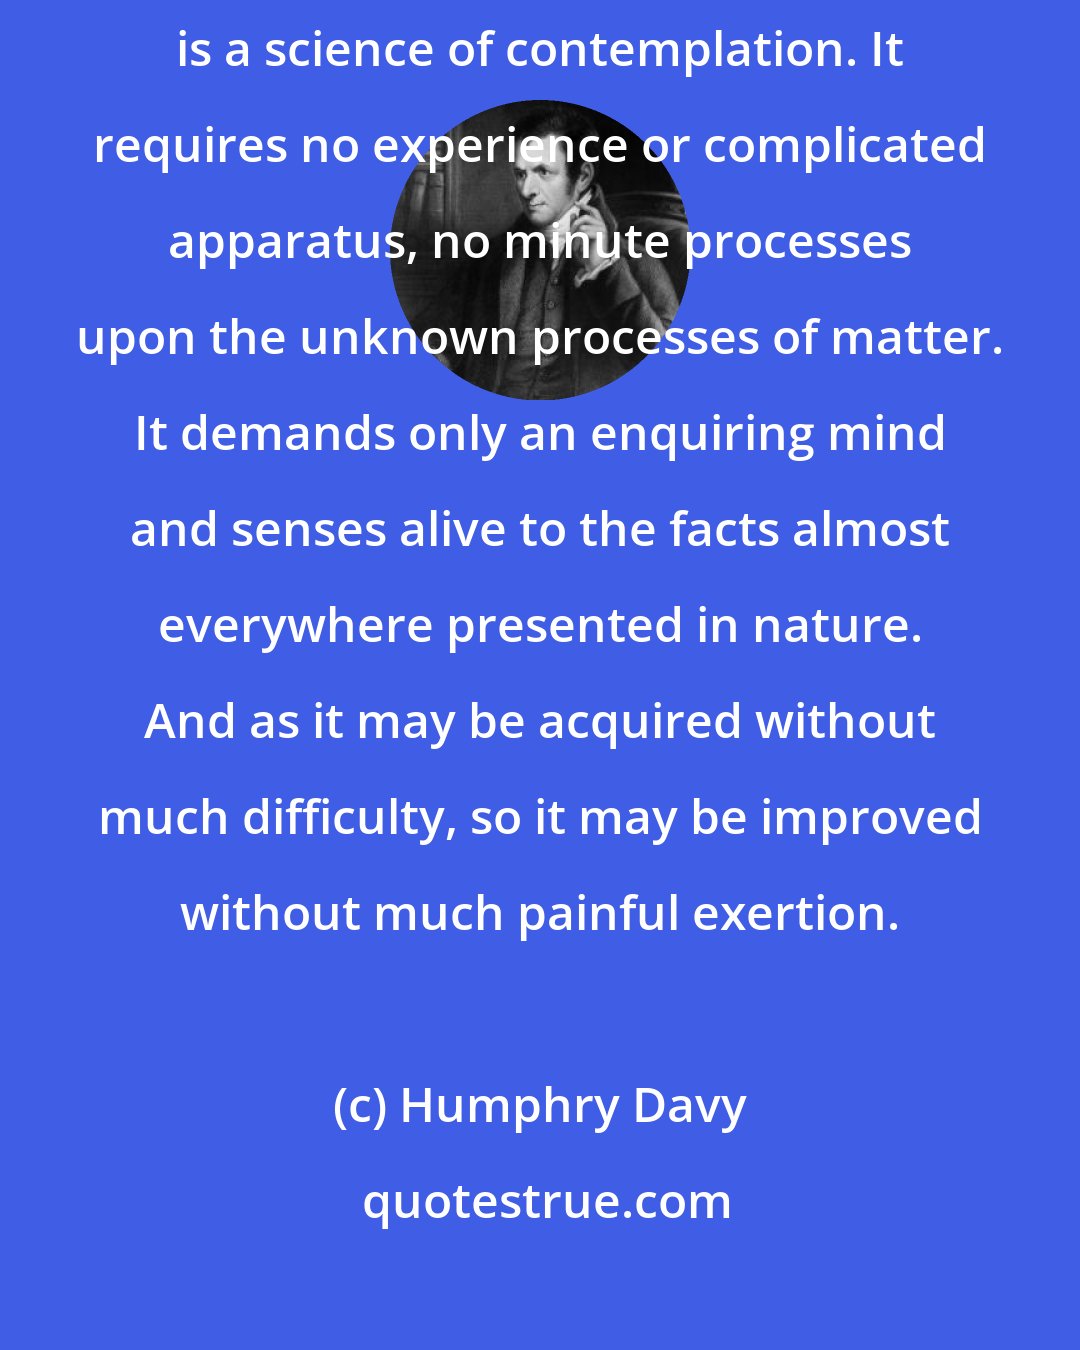 Humphry Davy: Geology, perhaps more than any other department of natural philosophy, is a science of contemplation. It requires no experience or complicated apparatus, no minute processes upon the unknown processes of matter. It demands only an enquiring mind and senses alive to the facts almost everywhere presented in nature. And as it may be acquired without much difficulty, so it may be improved without much painful exertion.